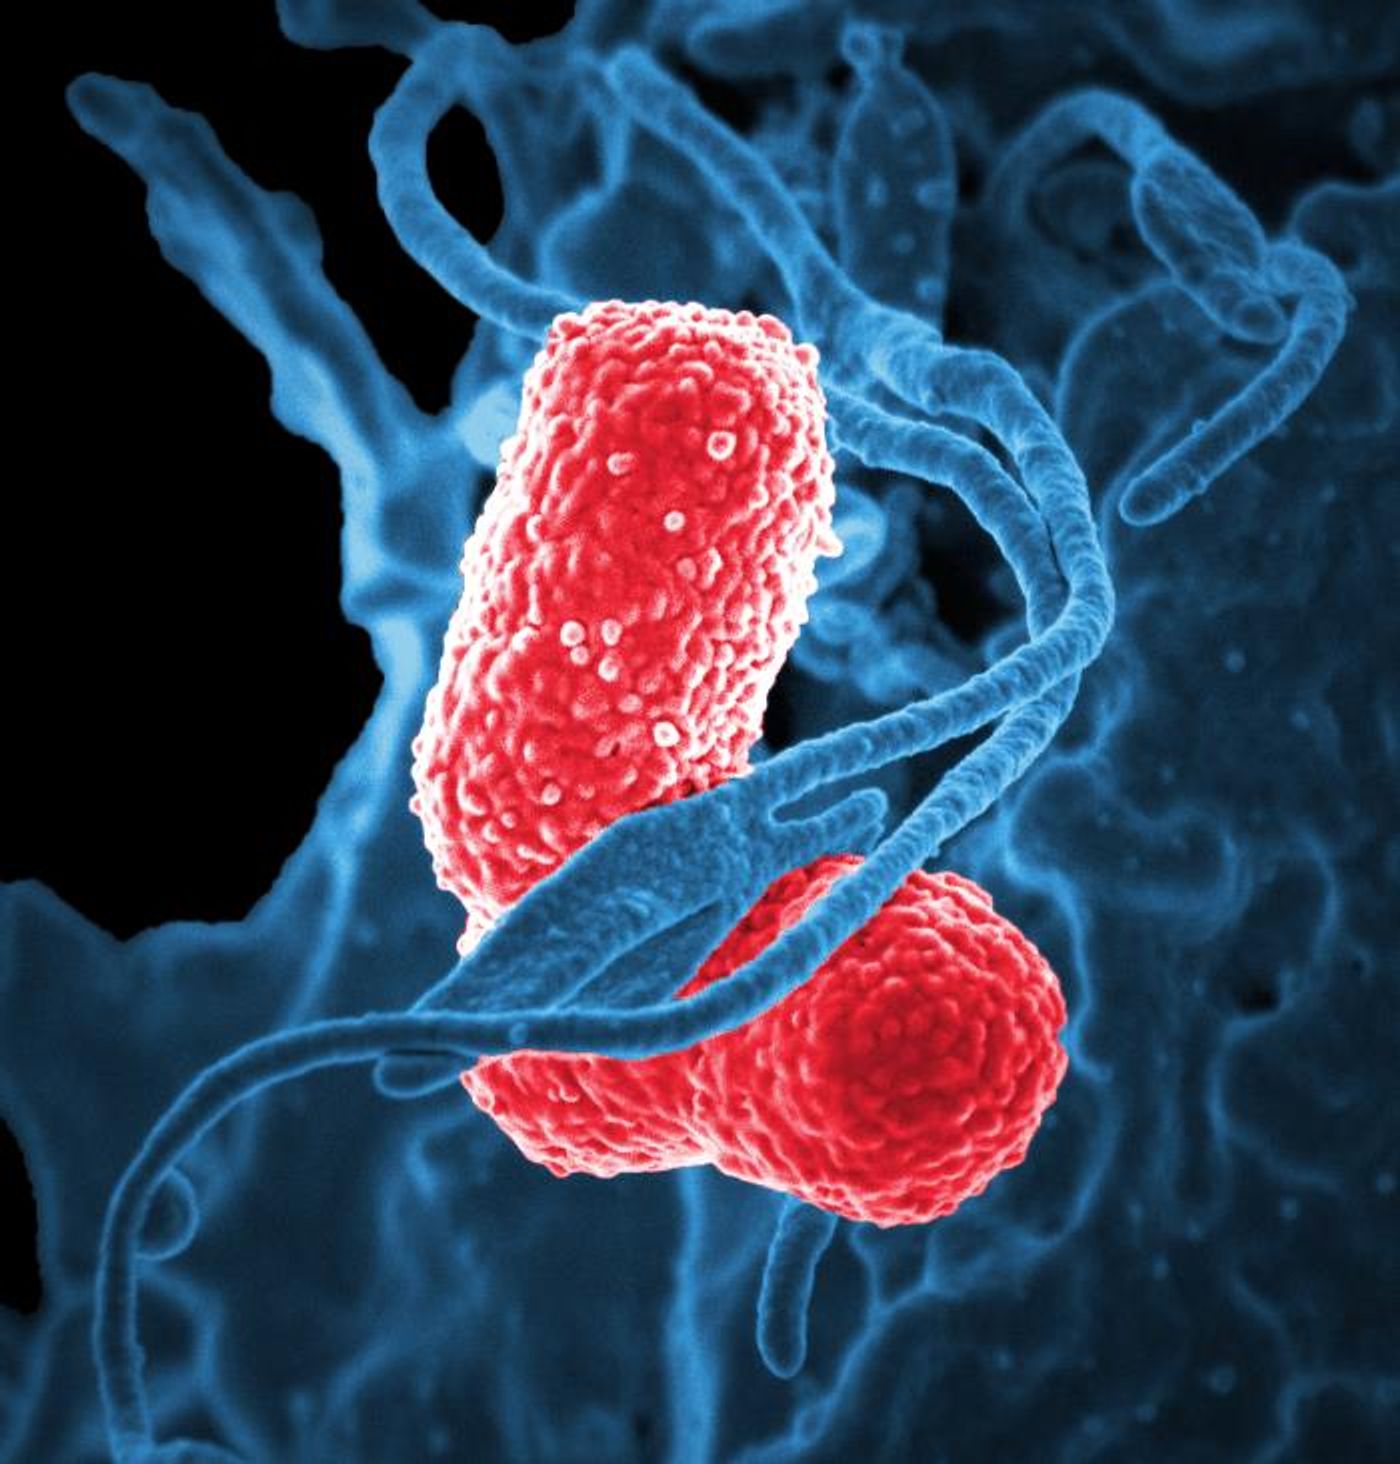 A digitally colorized SEM image, of a human white blood cell, (blue) interacting with two multidrug-resistant Klebsiella pneumoniae bacteria (pink), which are known to cause severe hospital acquired, nosocomial infections. / Credit: National Institute of Allergy and Infectious Diseases (NIAID) / David Dorward, PhD